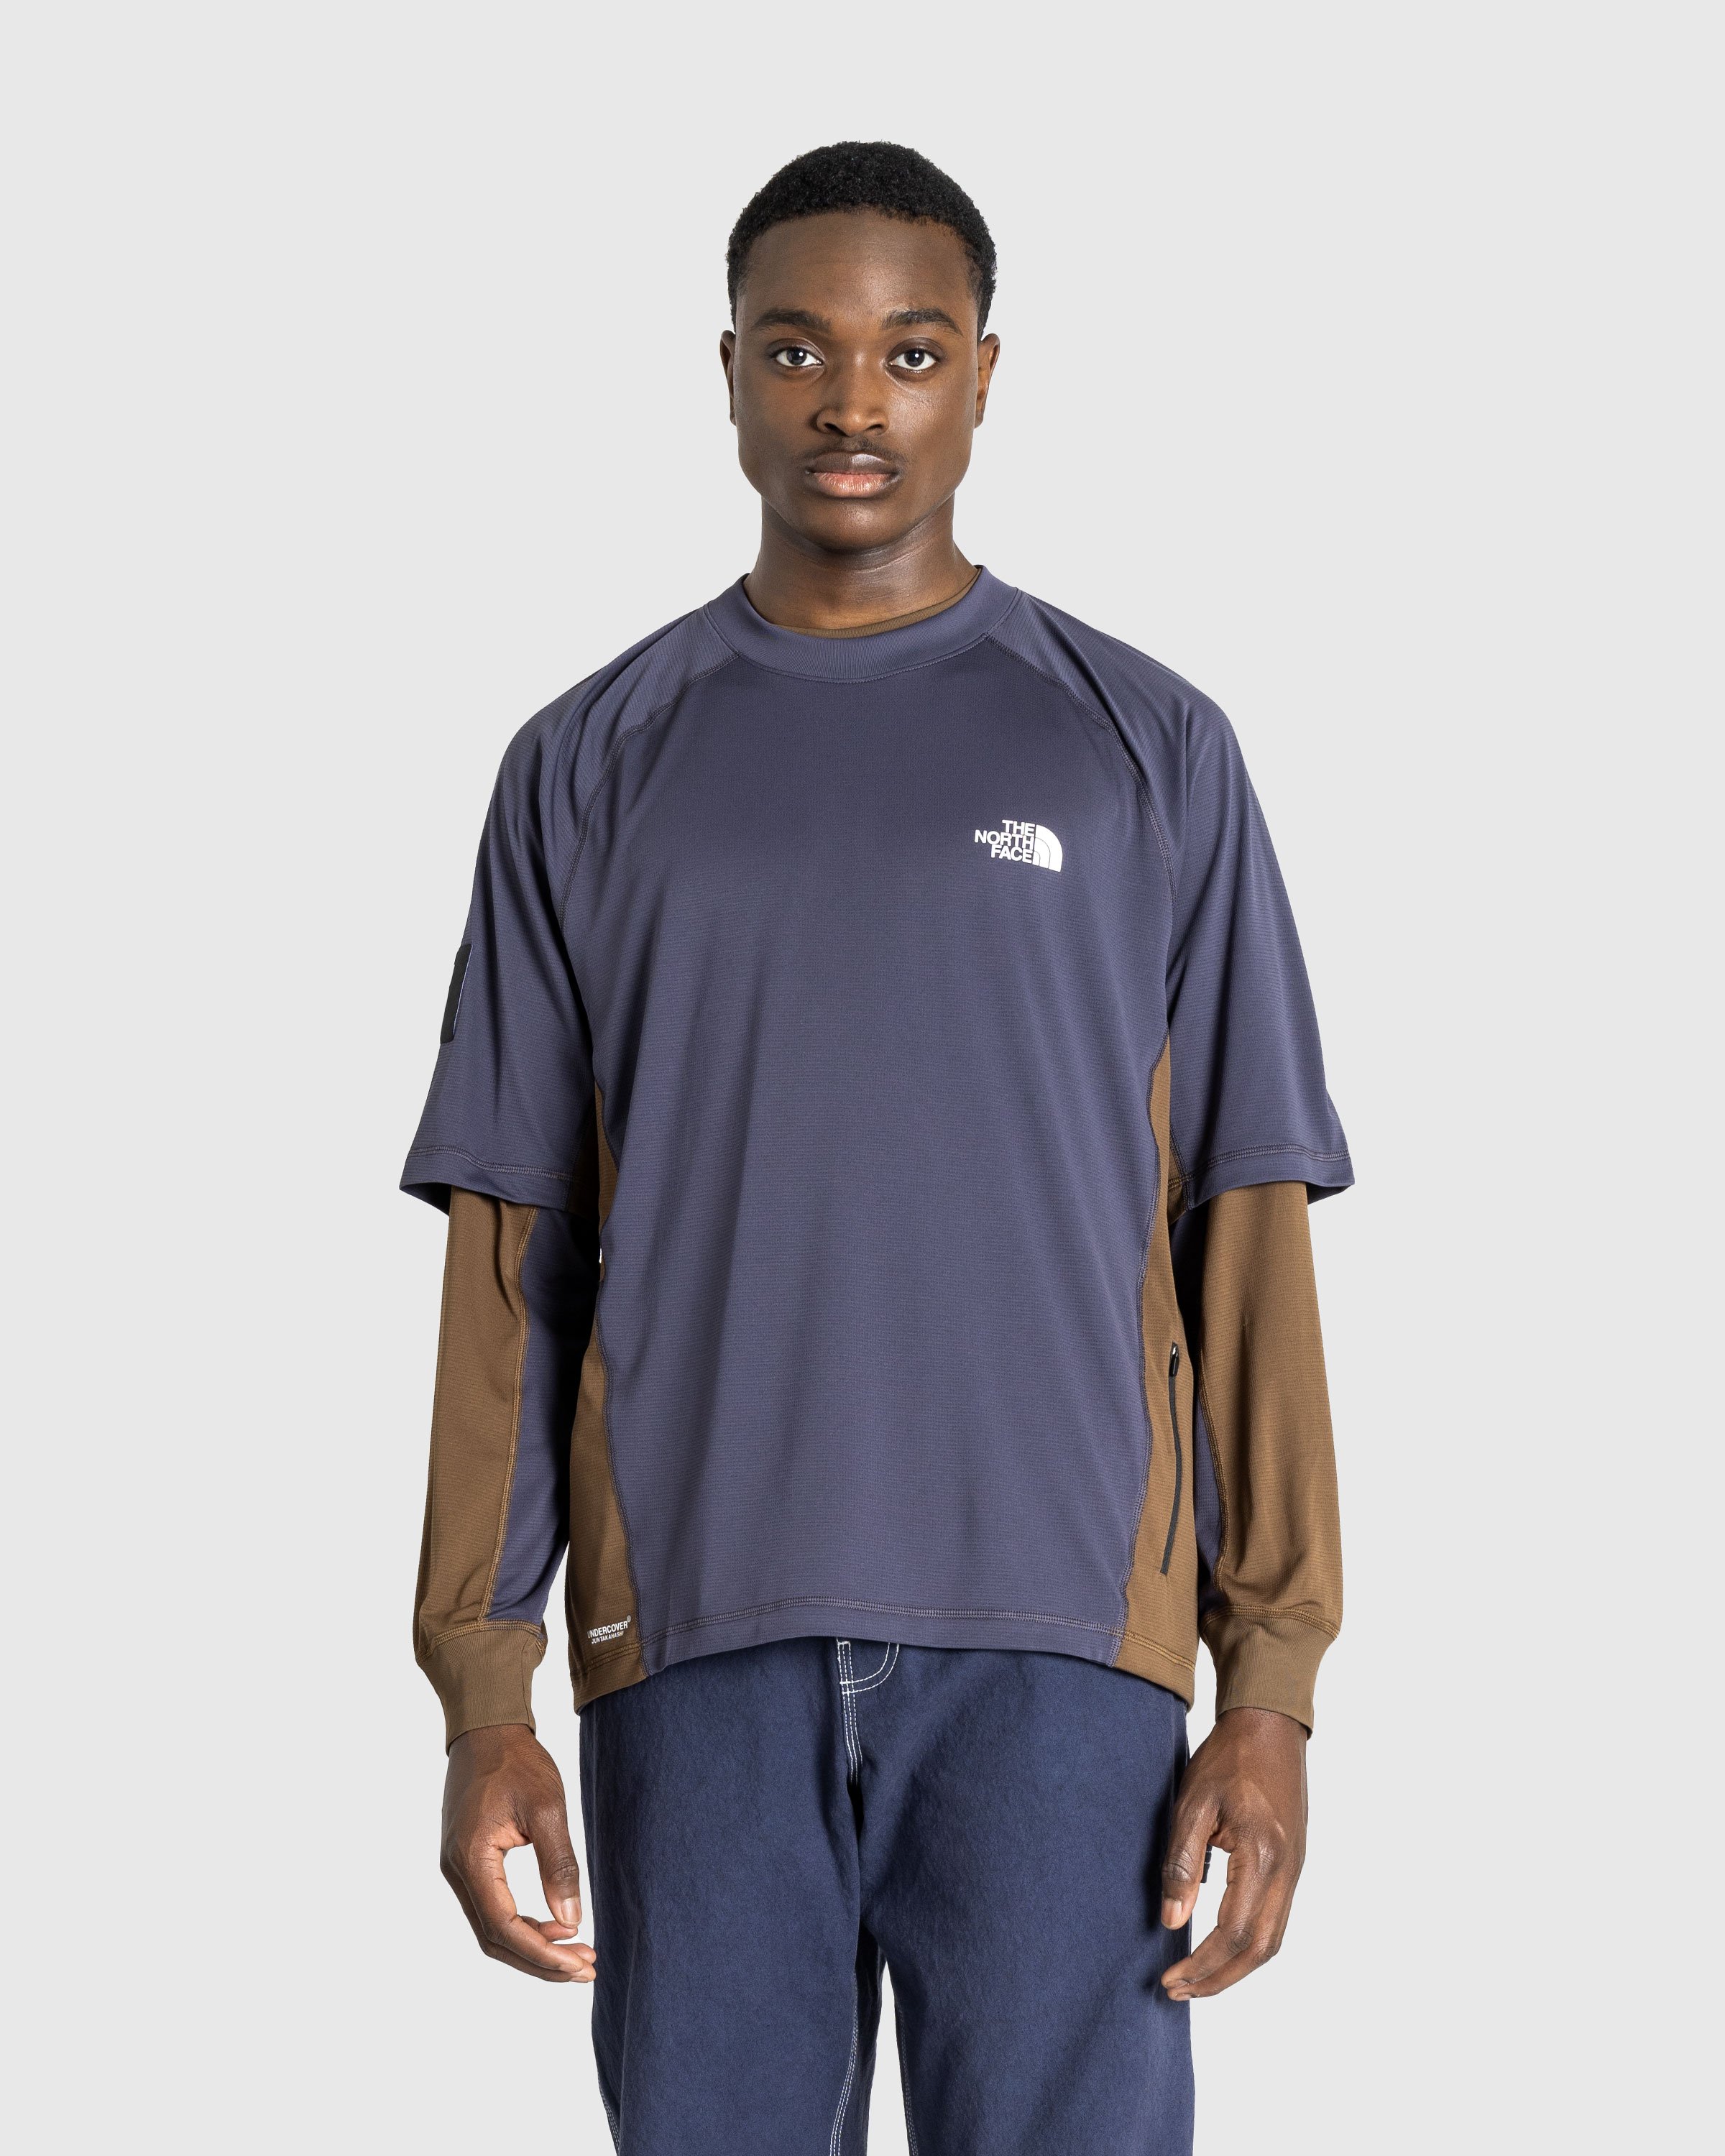 The North Face x UNDERCOVER - SOUKUU TRAIL RUN S/S TEE PERISCOPE GREY/DARK EAR - Clothing - Grey - Image 2